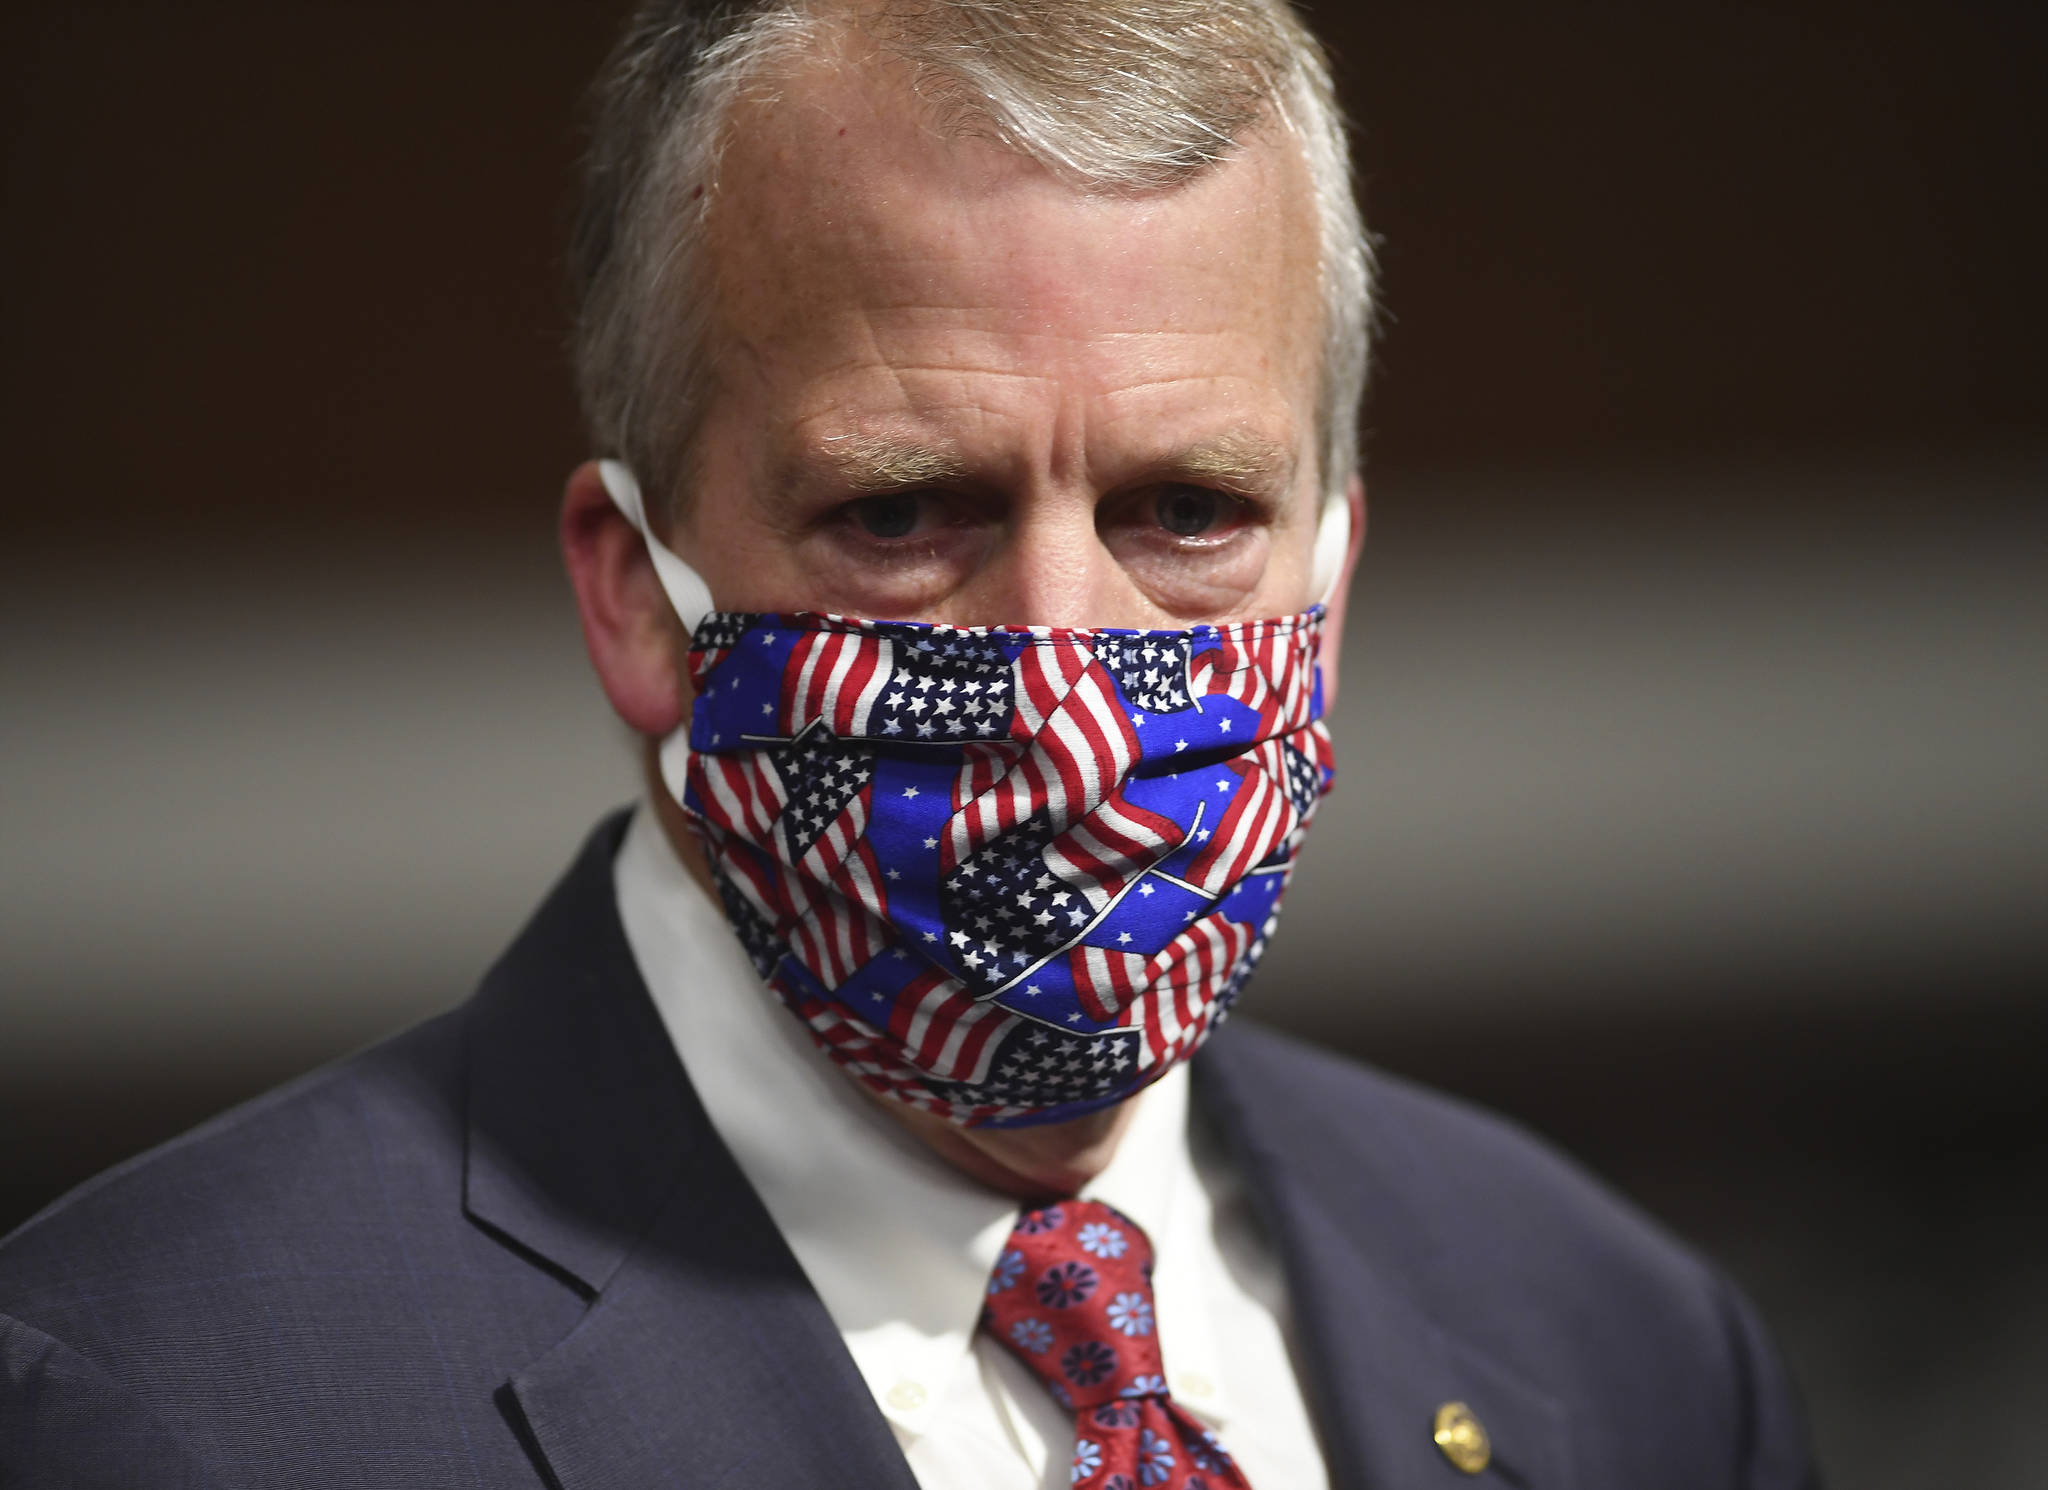 In this May 7 photo, Sen. Dan Sullivan wears a mask at a hearing in Washington. Protesters in Alaska carrying a banner and a caribou heart interrupted a campaign event for Sullivan who is seeking reelection. The Anchorage Daily News reported the small group of protesters were restrained and escorted out by staff and attendees at Sullivan’s campaign launch event in a hangar near Ted Stevens Anchorage International Airport, Saturday, July 11. (Kevin Dietsch/Pool via AP, File)